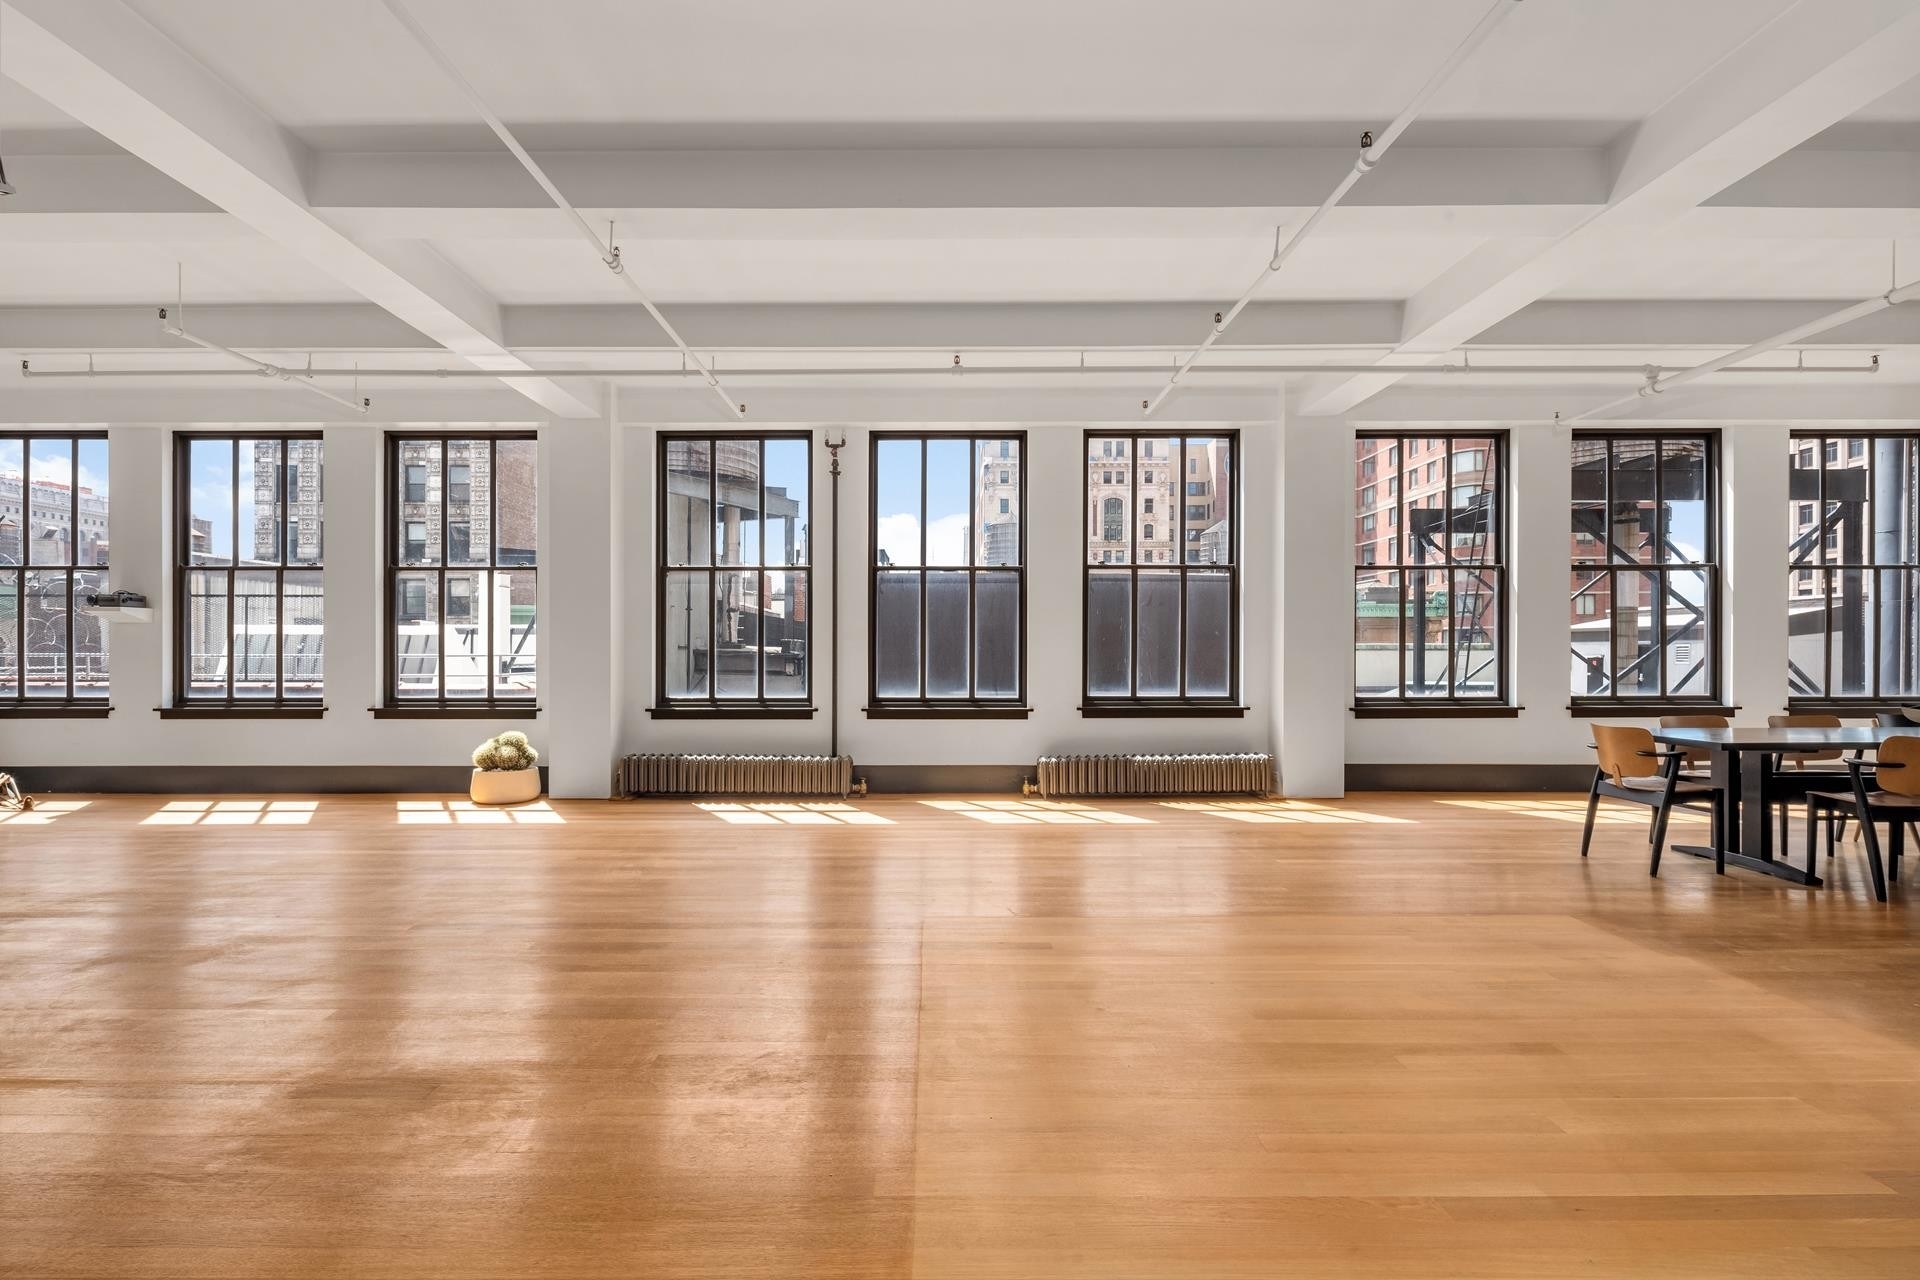 Co-op Properties for Sale at 12 Lofts, 38 W 26TH ST, PH12 Flatiron District, New York, New York 10010